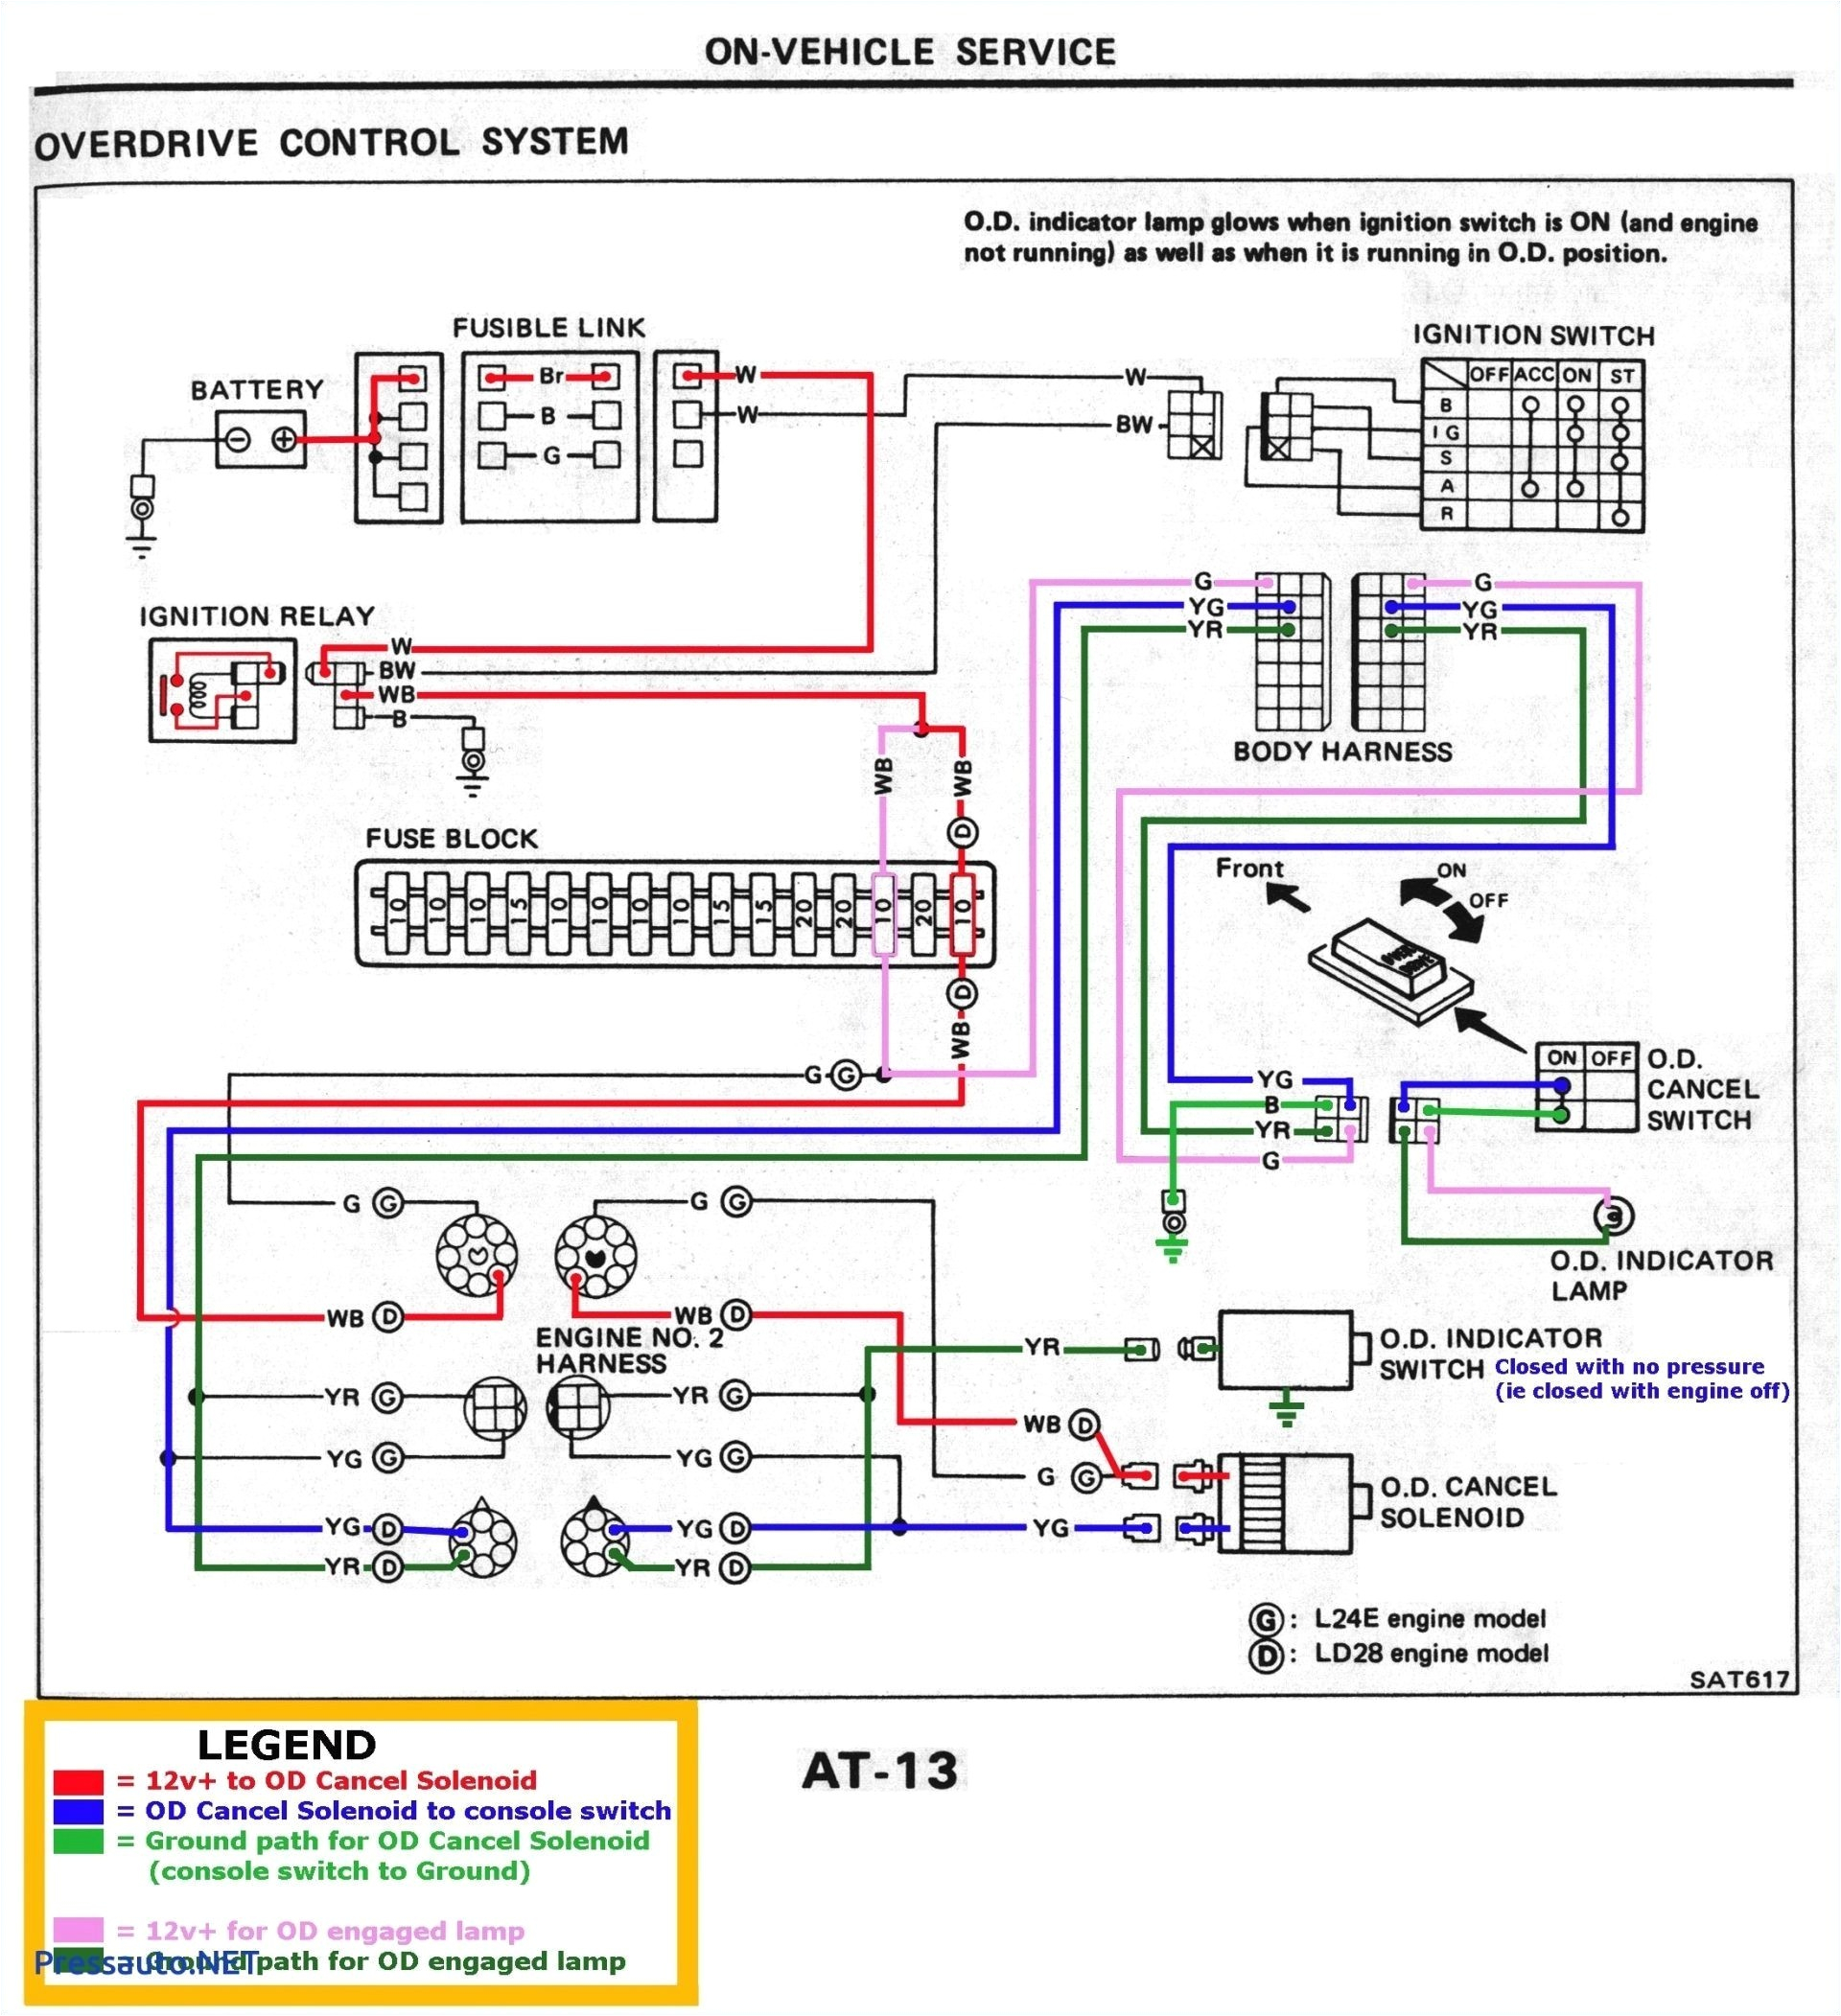 house wiring diagram examples refrence for interposing relay new rh techteazer com contactor relay wiring diagram